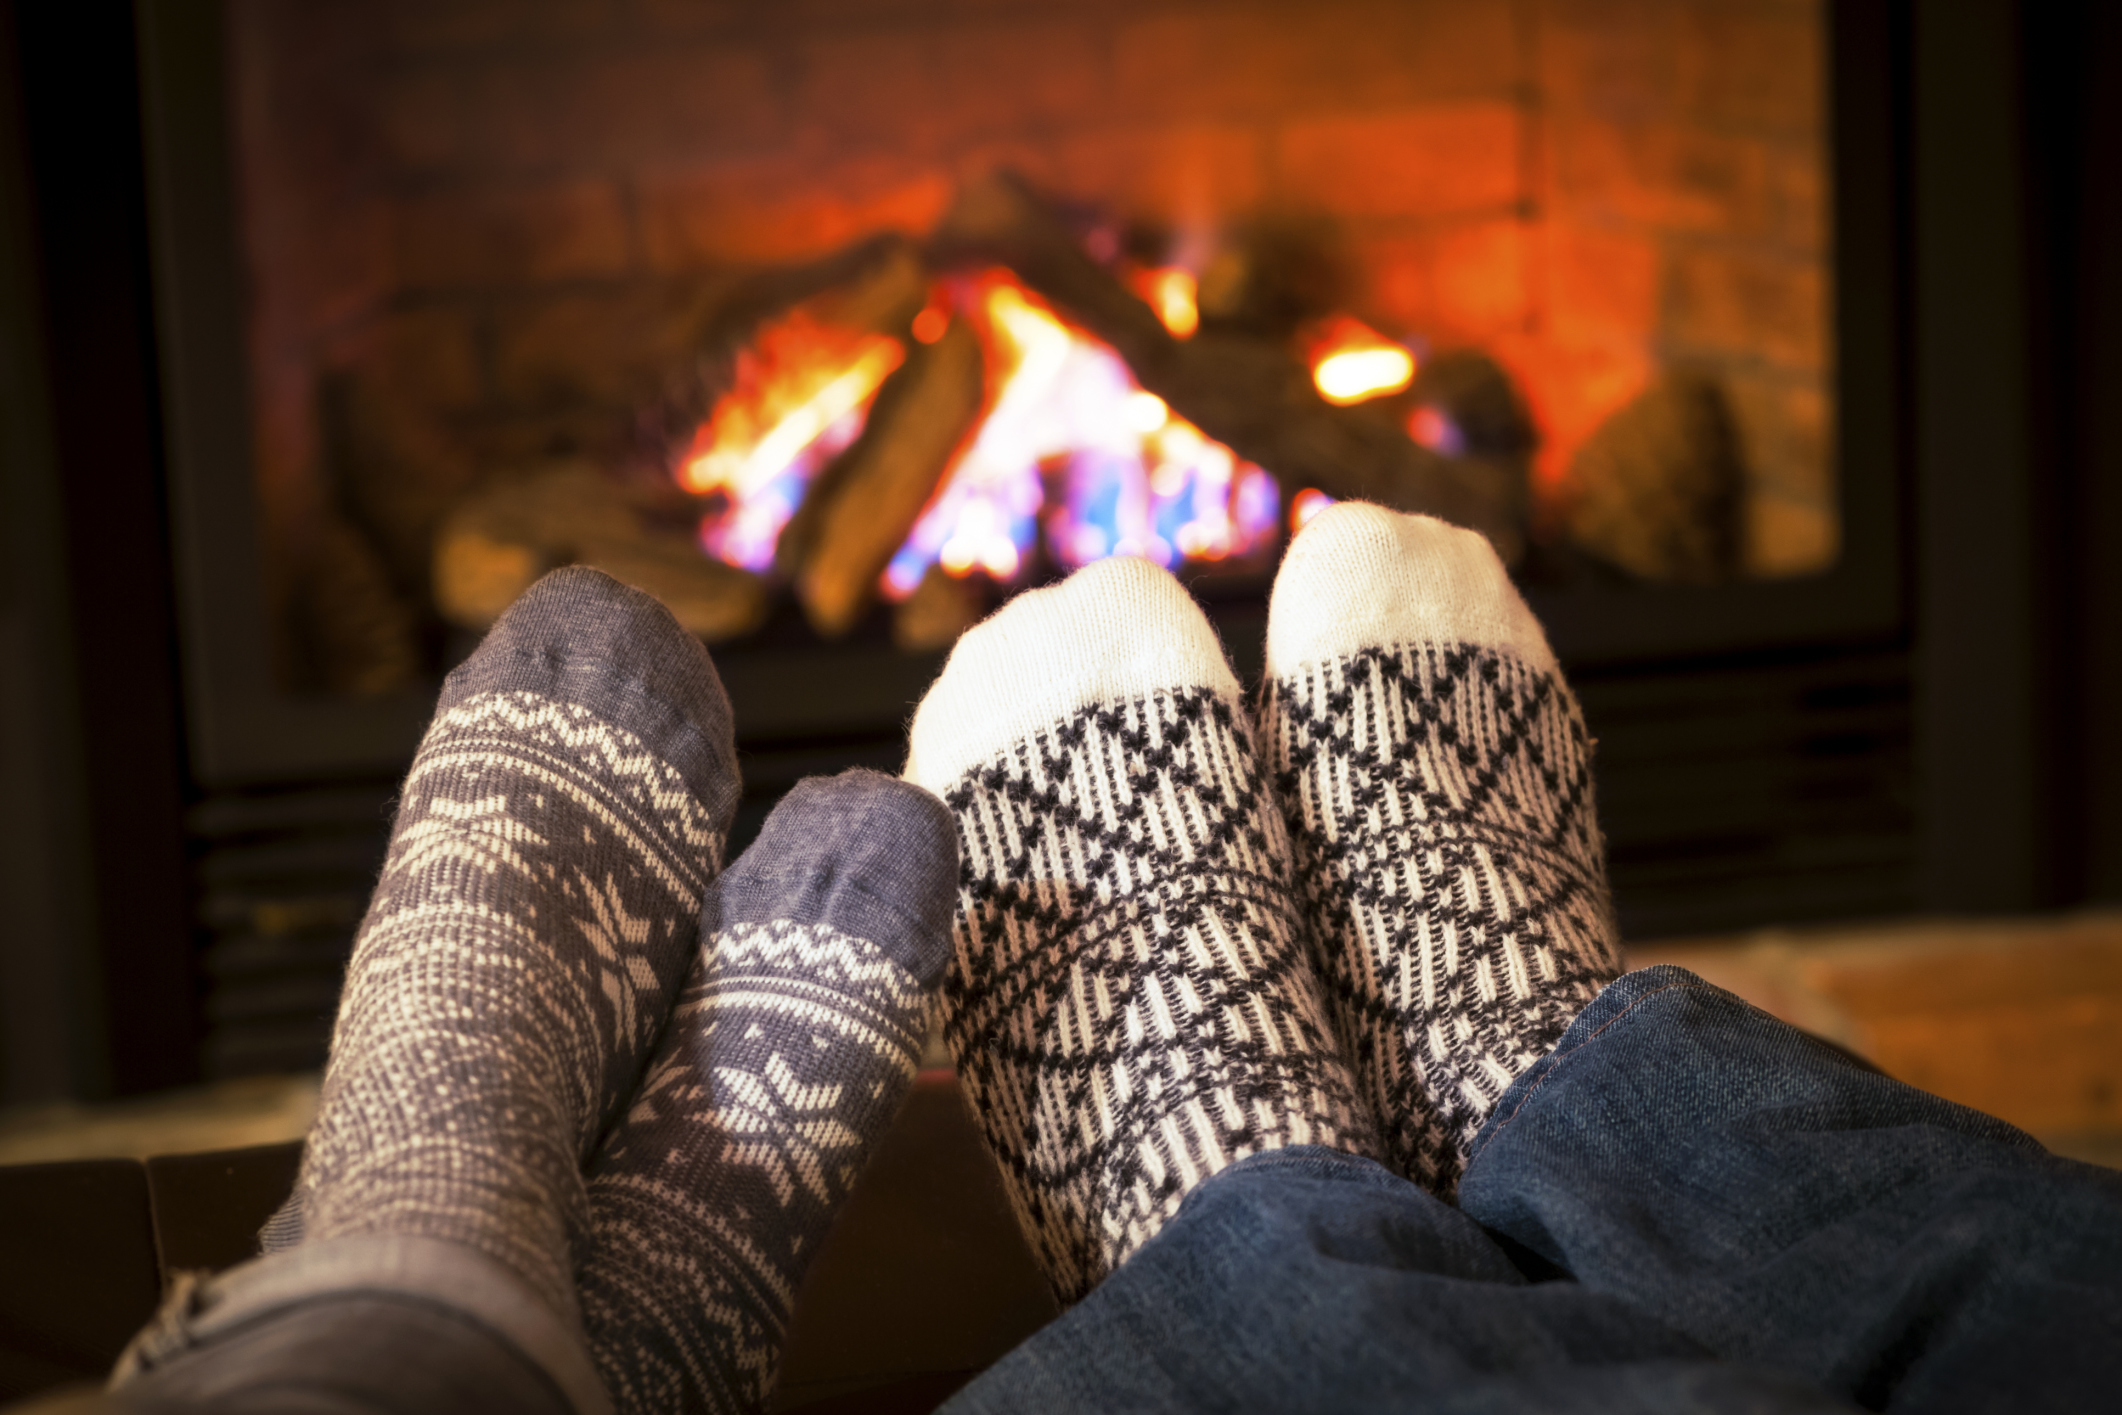 3 of the Best Christmas Destinations Home feet up by the fire